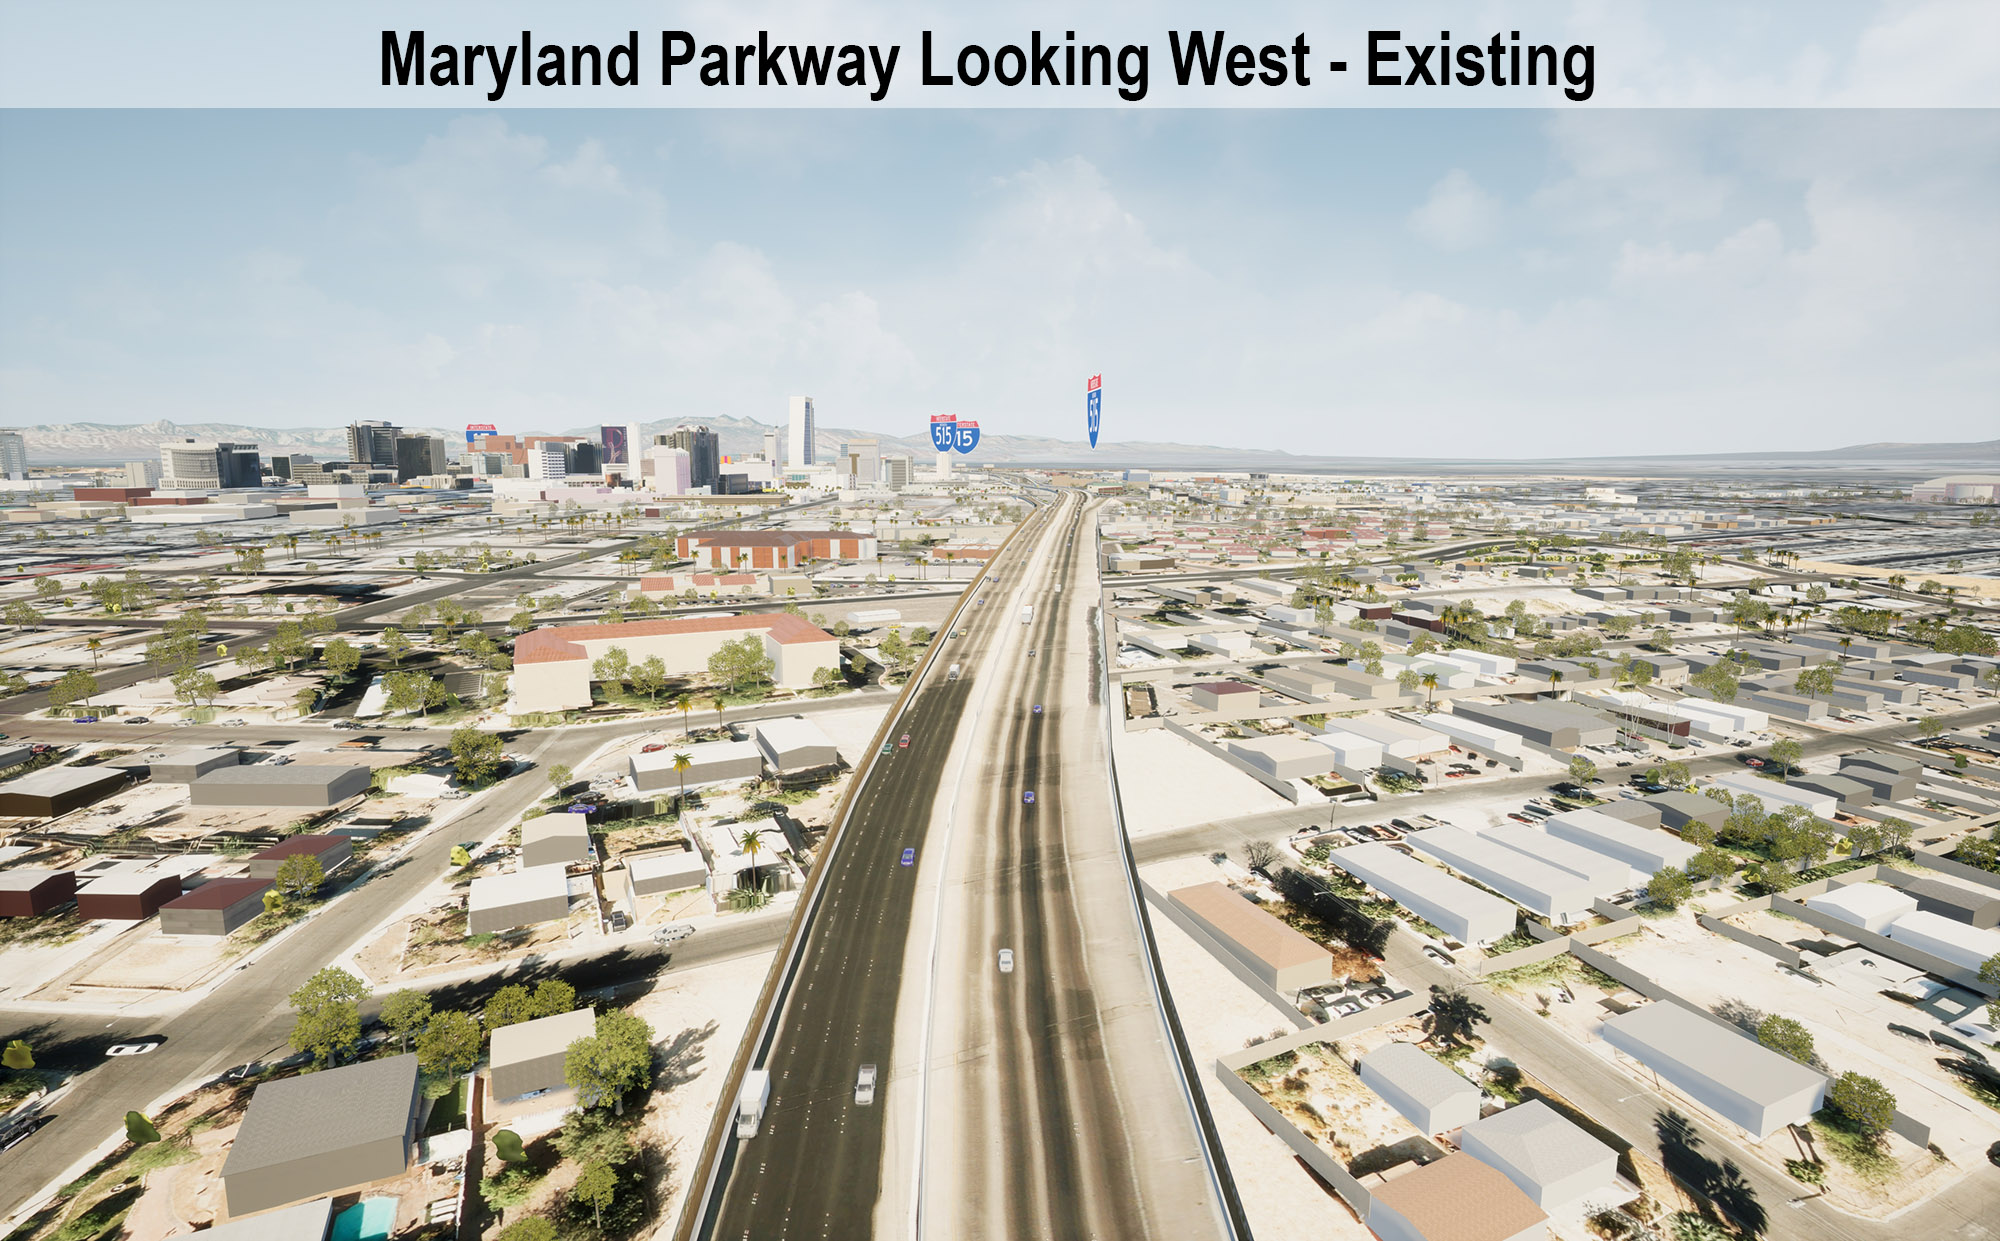 Maryland Parkway Looking West - Existing